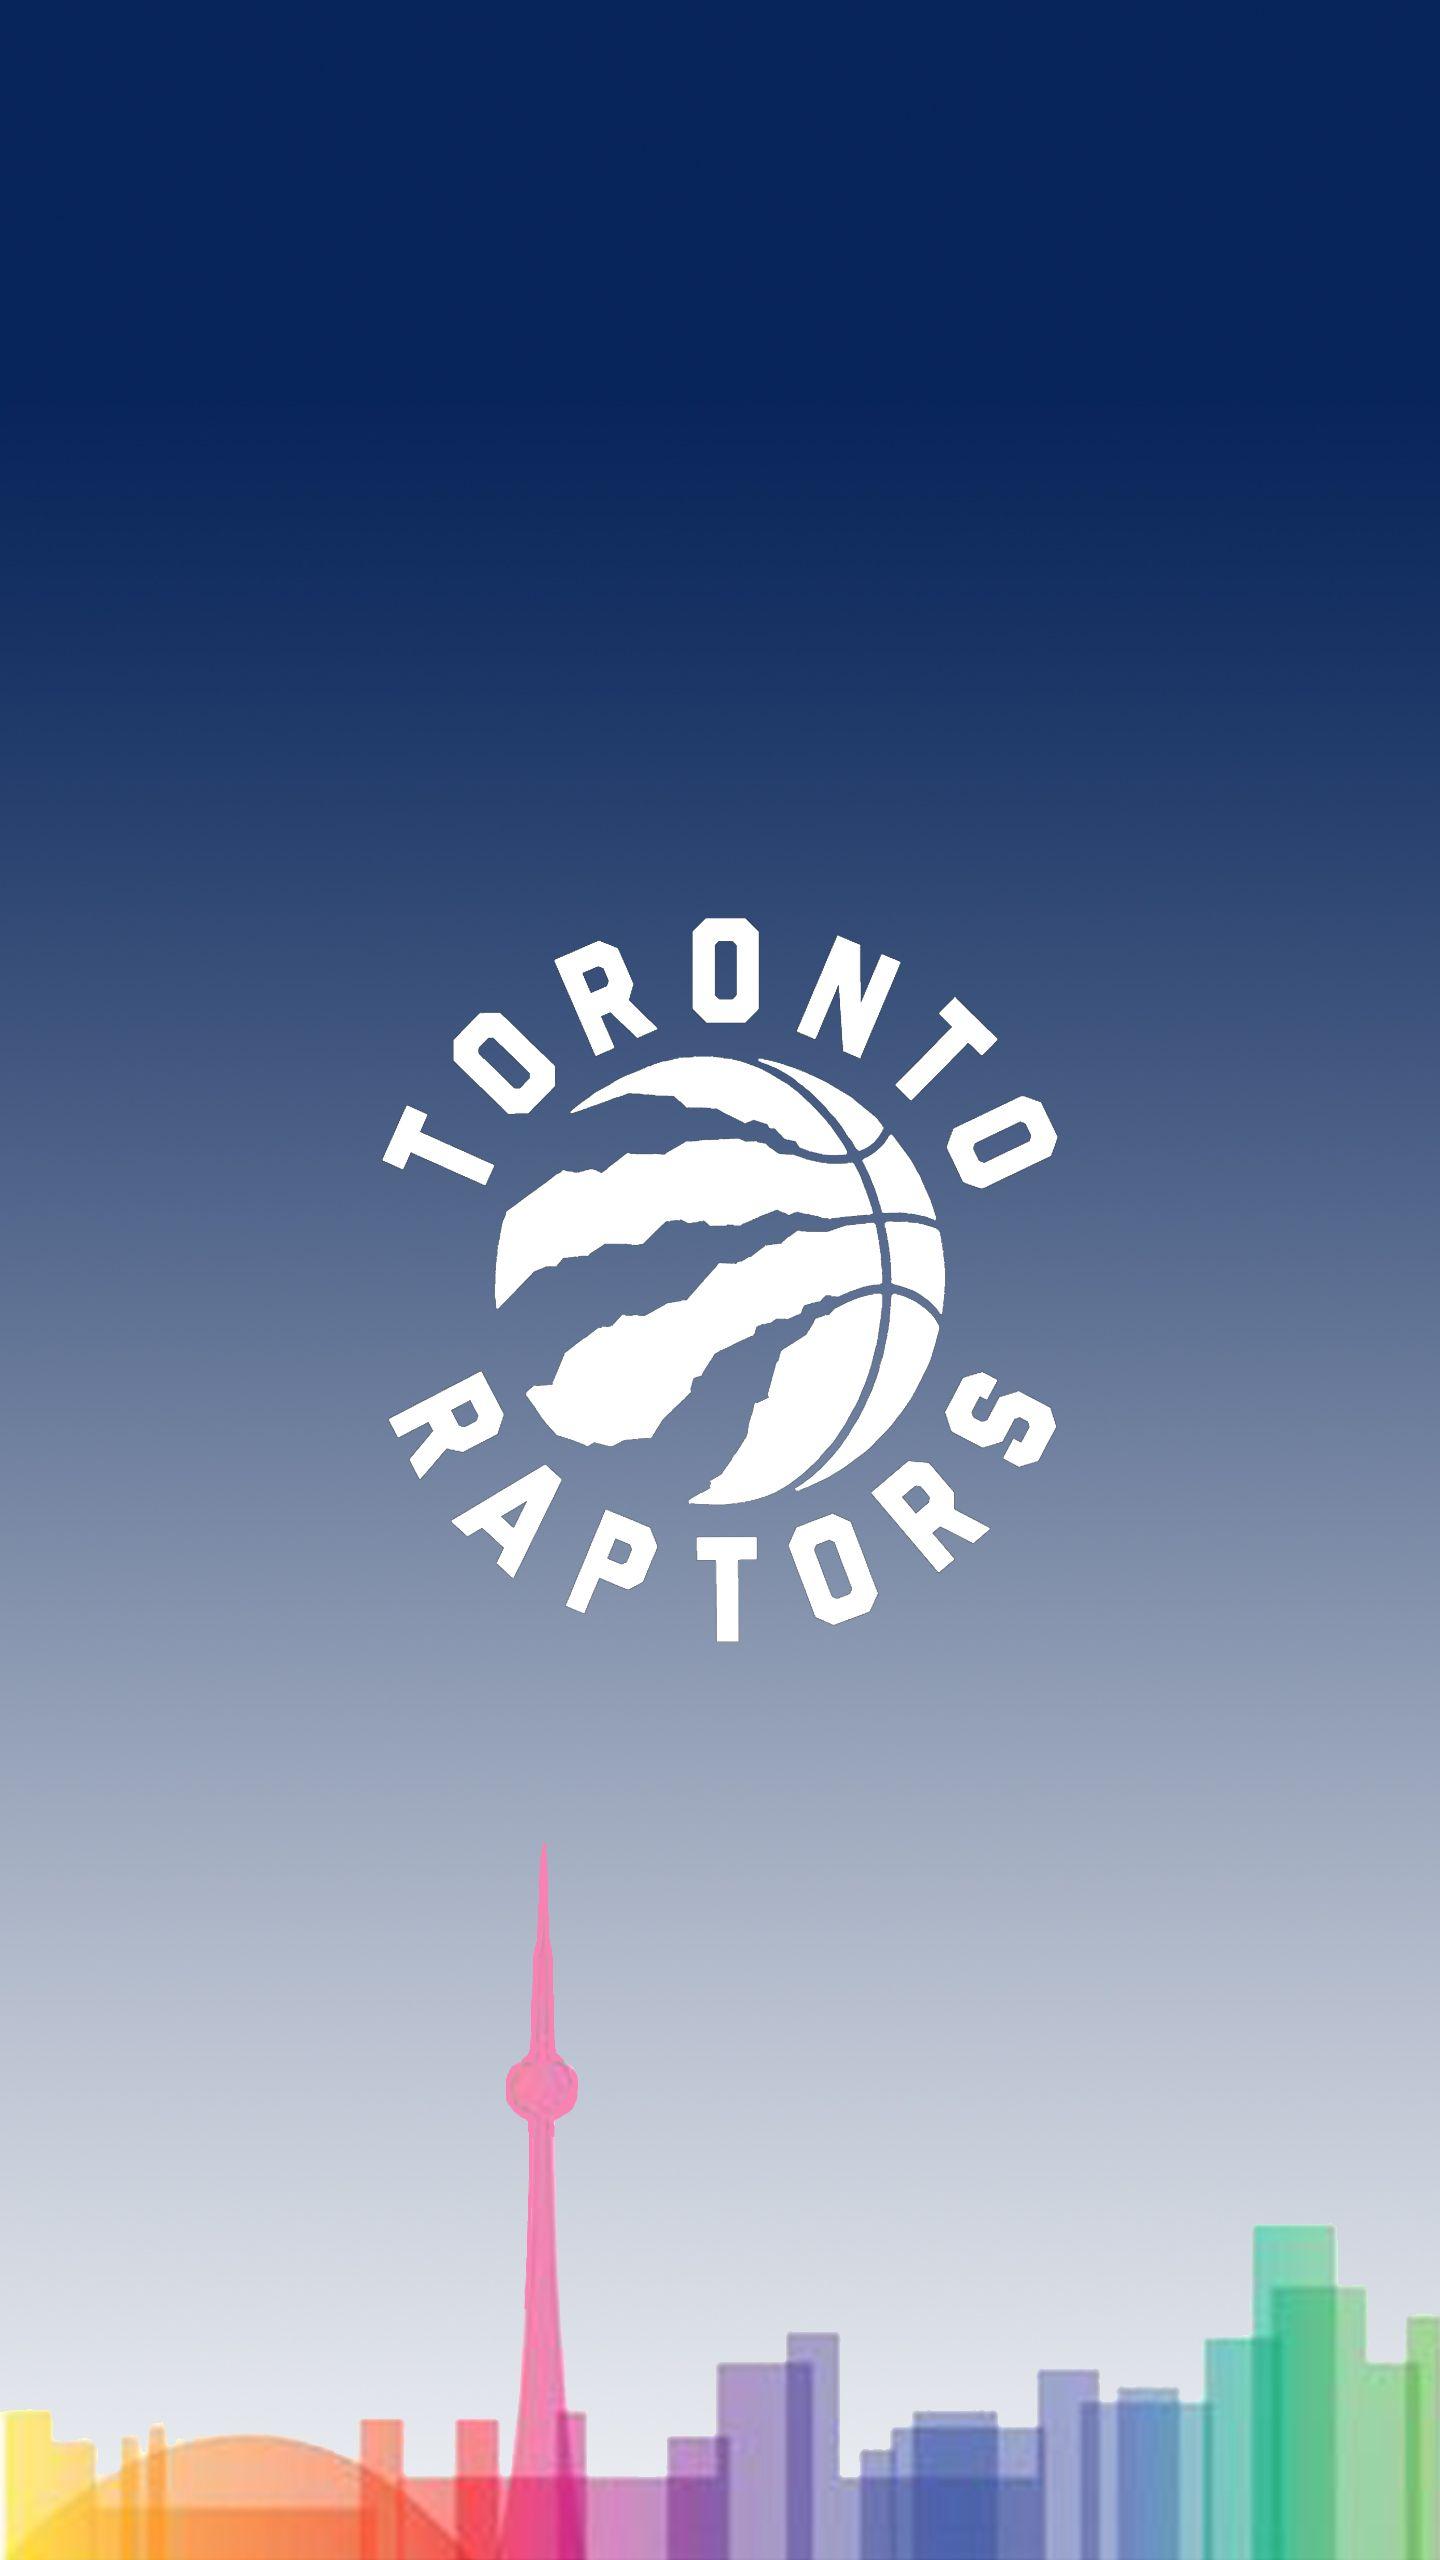 Toronto Raptors  Bet On Yourself with these wallpapers  Facebook